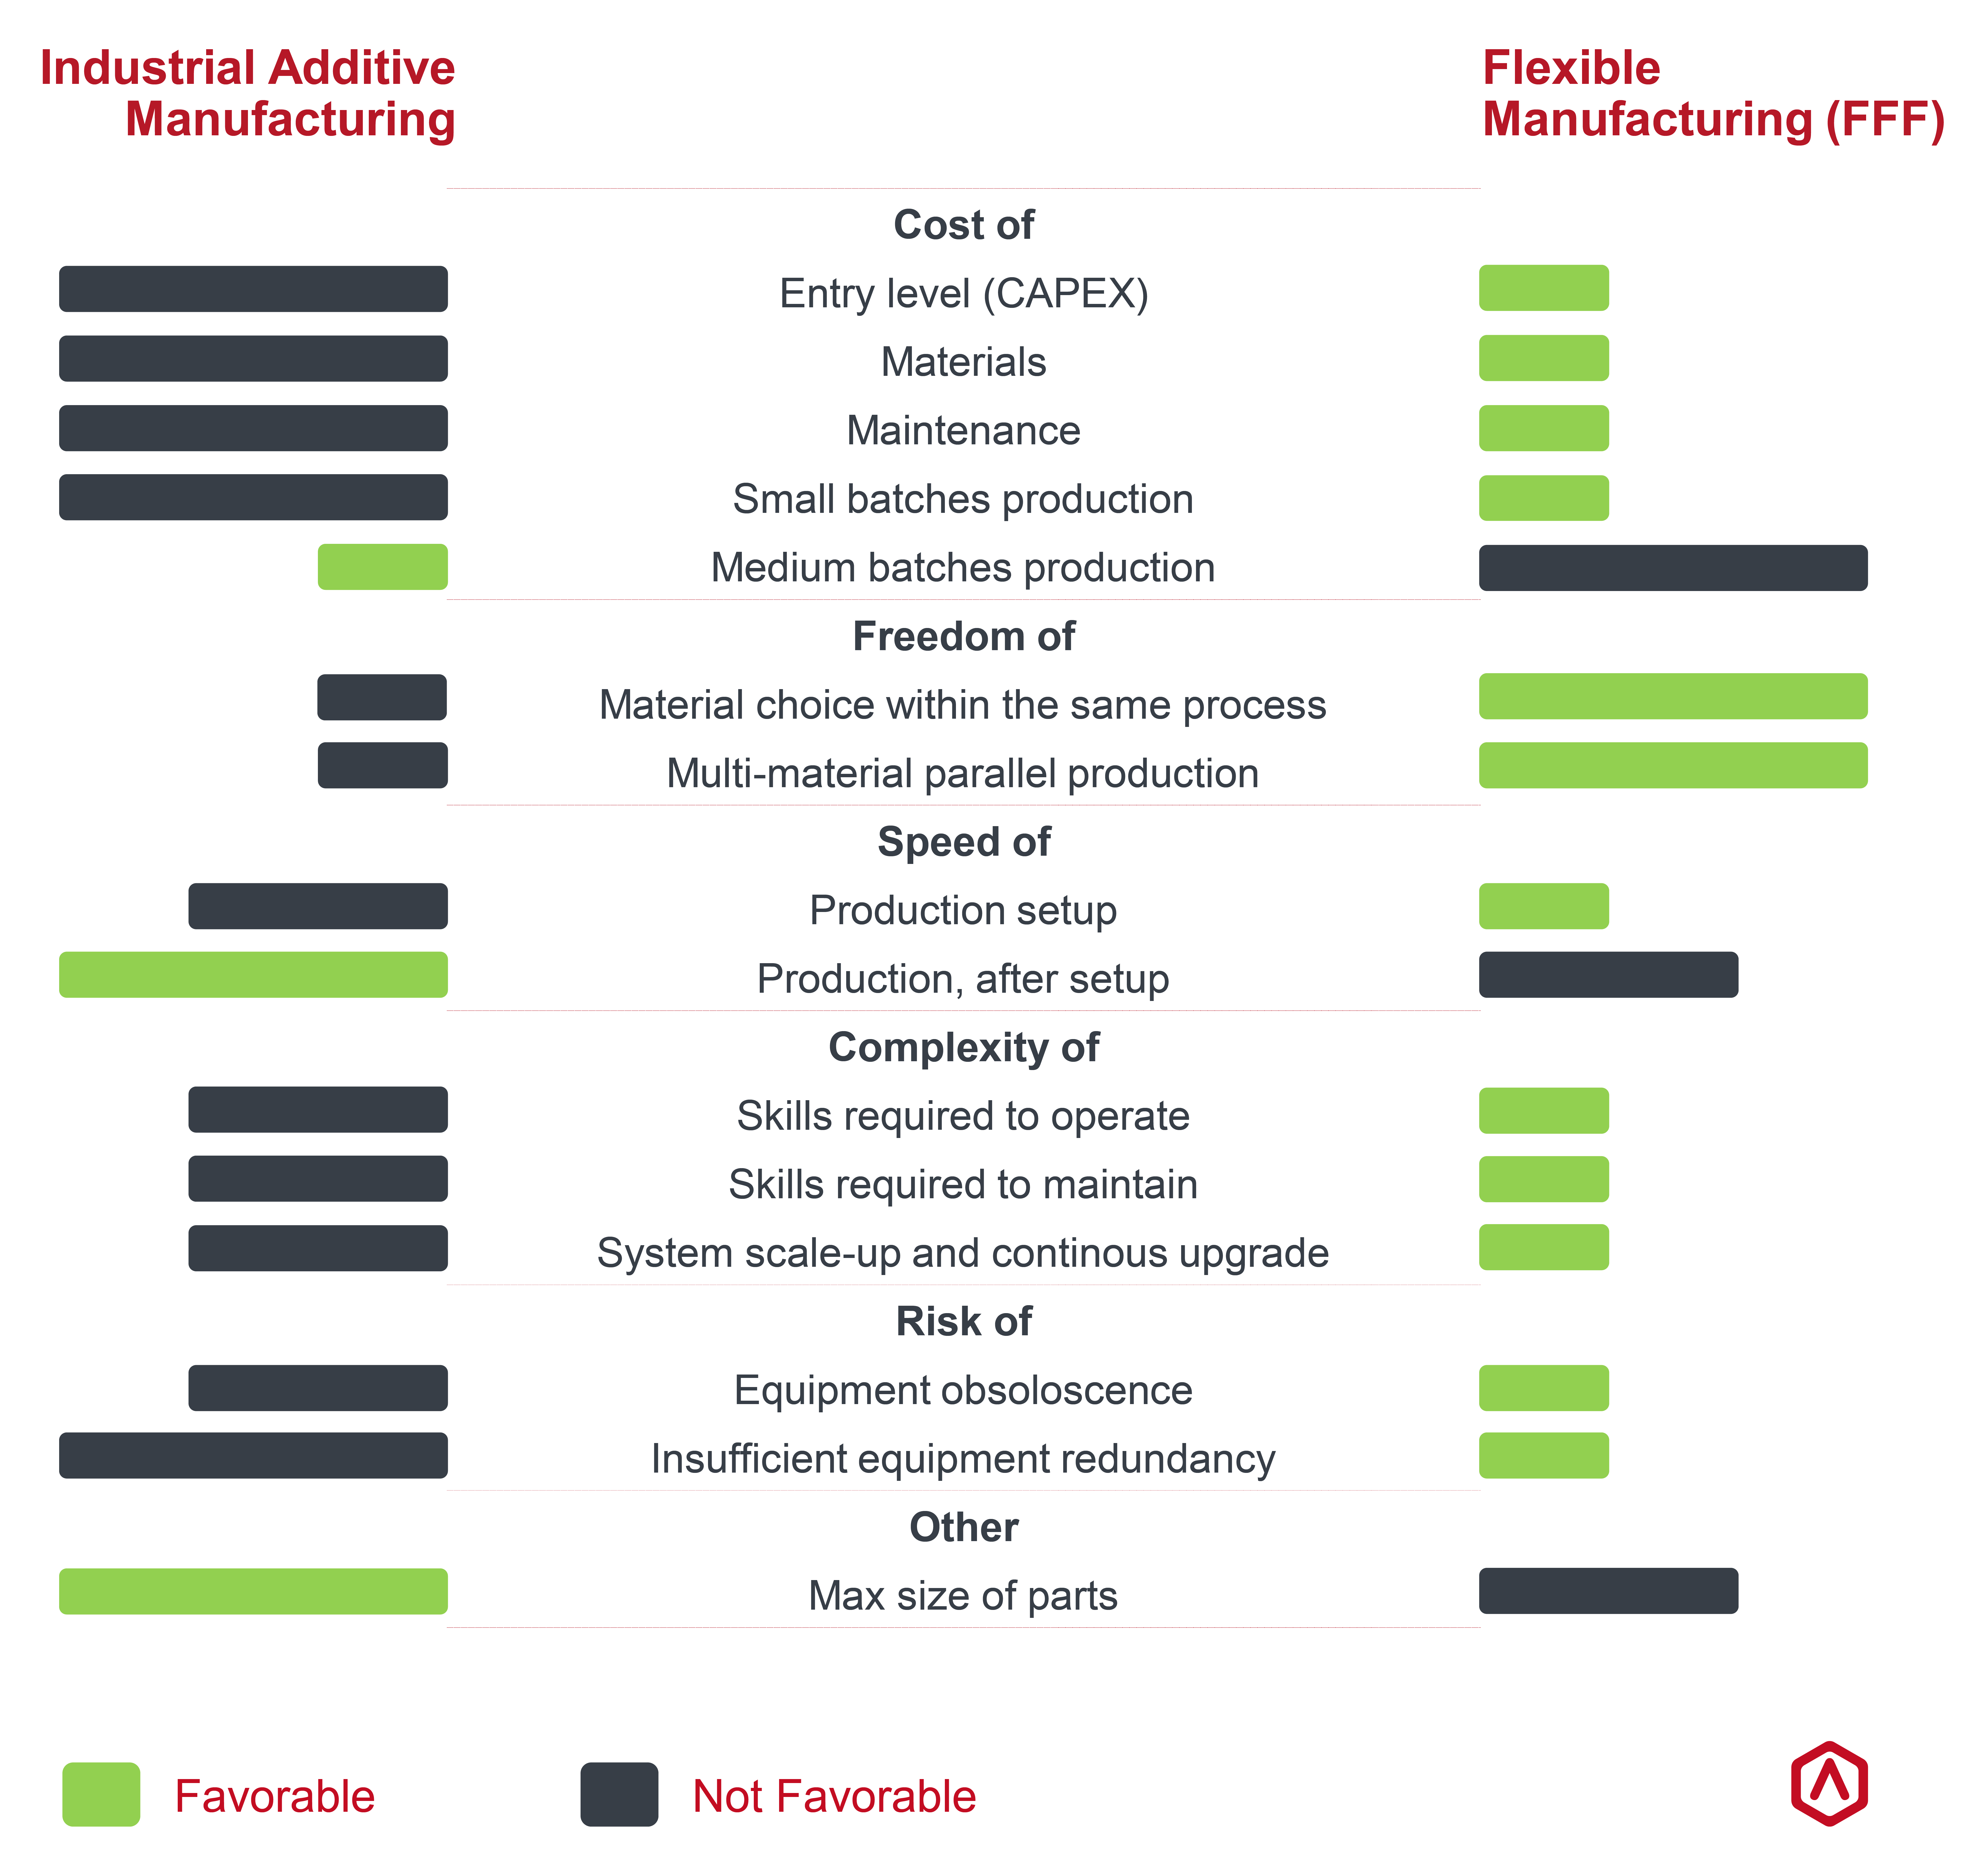 Direct comparison of industrial additive manufacturing with Flexible Manufacturing (FFF). Image via Raise3D.